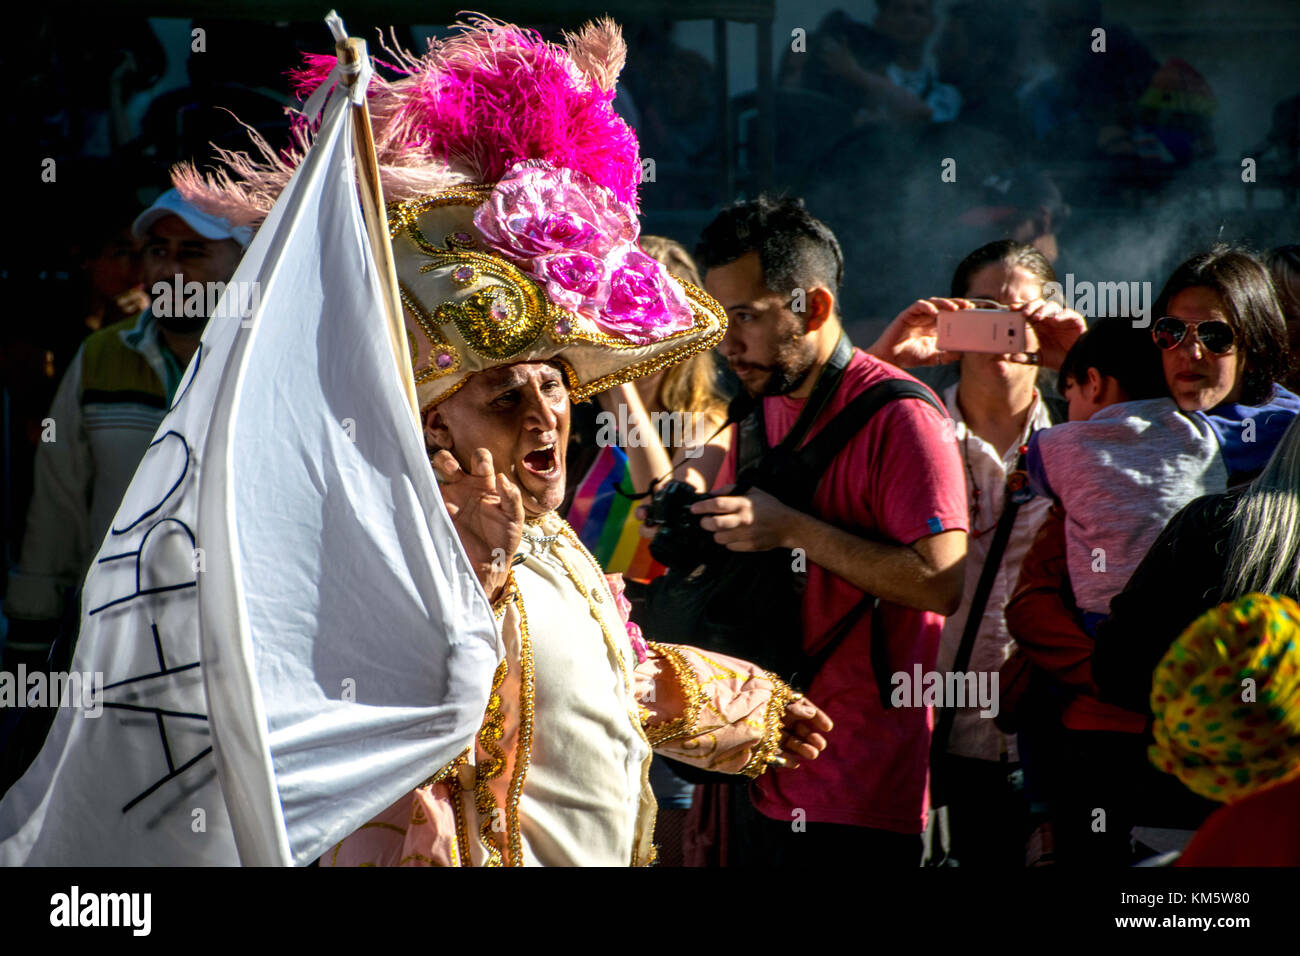 November 18, 2017 - Buenos Aires, Ciudad AutÃ³noma de Buenos Aires, Argentina - A costumed parade leader chants slogans among spectators and supporters. Thousands of pride supporters marched from Plaza de Mayo to Congreso de la NaciÃ³n during the city's 26th annual Marcha del Orgullo Gay Credit: Jason Sheil/SOPA/ZUMA Wire/Alamy Live News Stock Photo